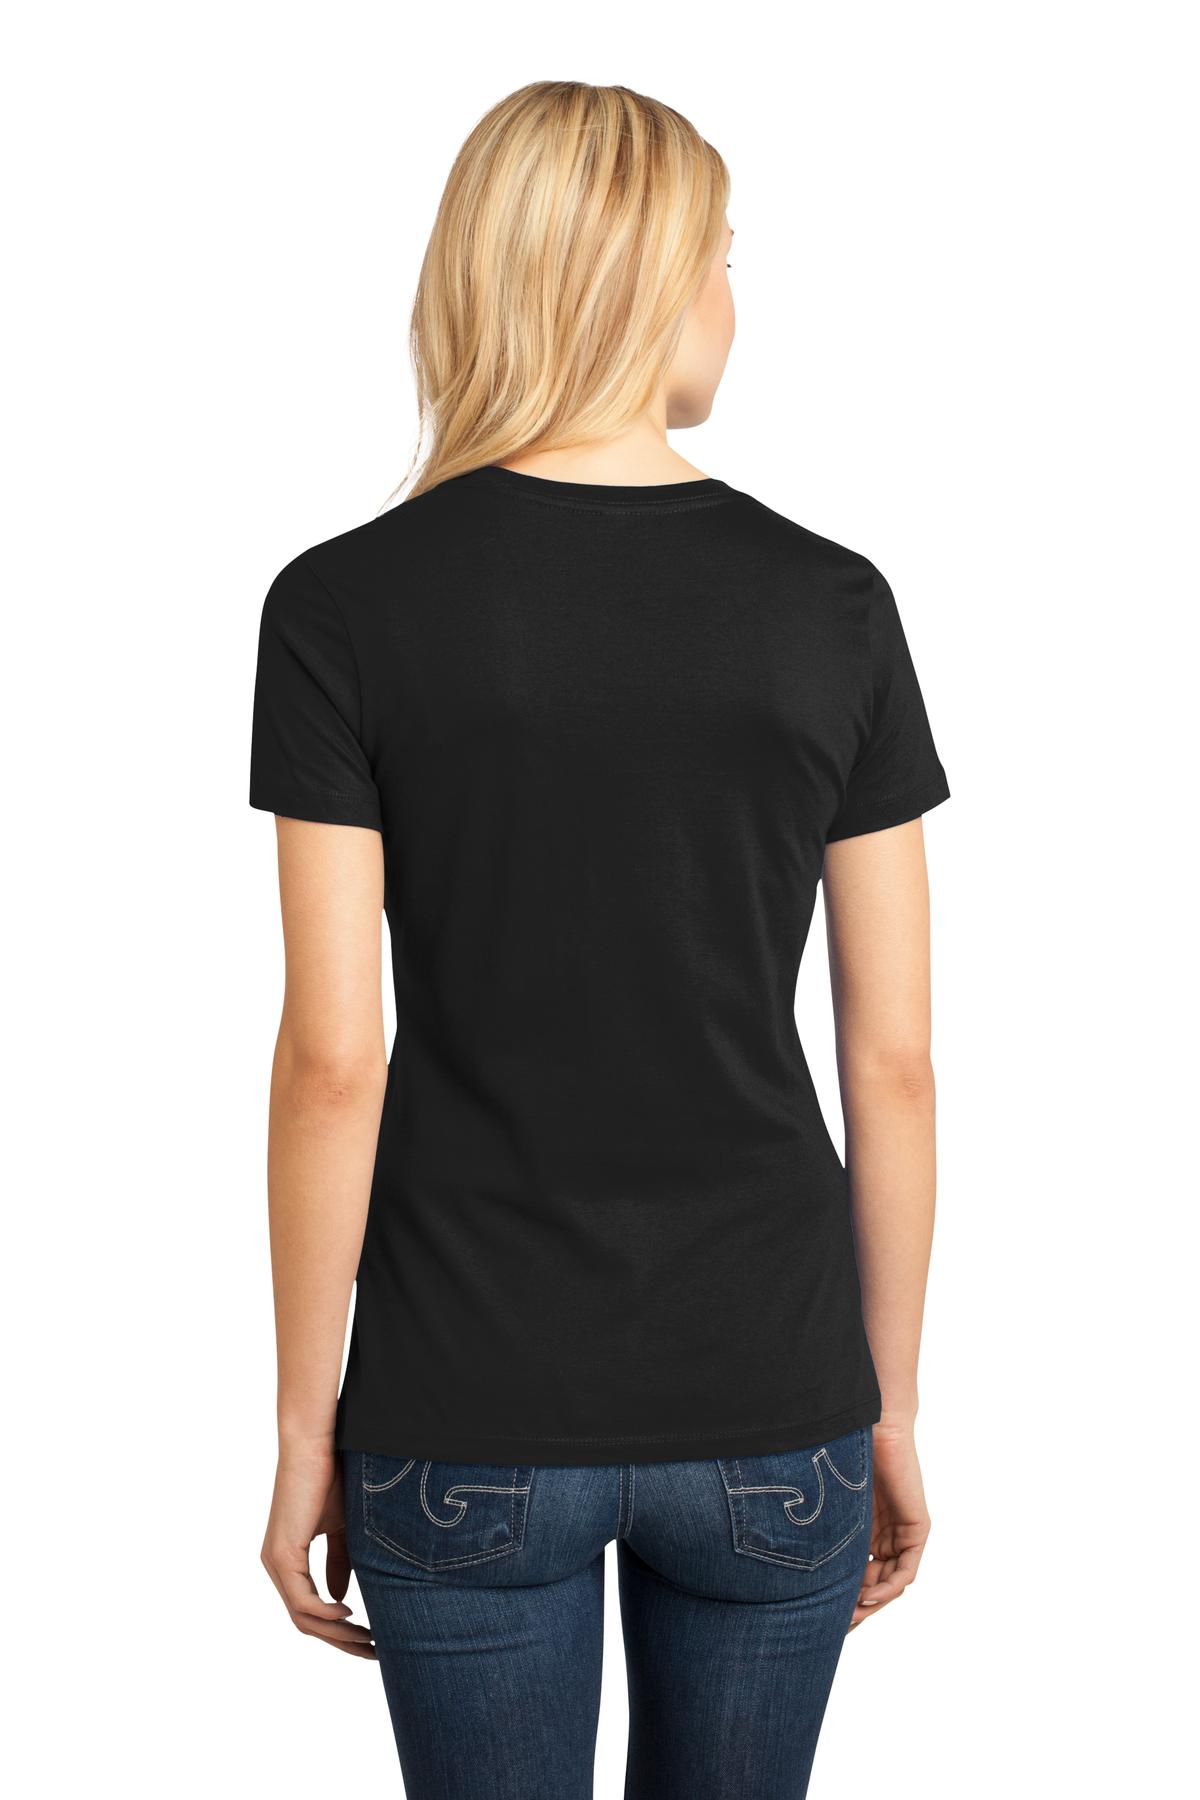 District DM104L | Women's Perfect Weight ® Tee | ShirtSpace